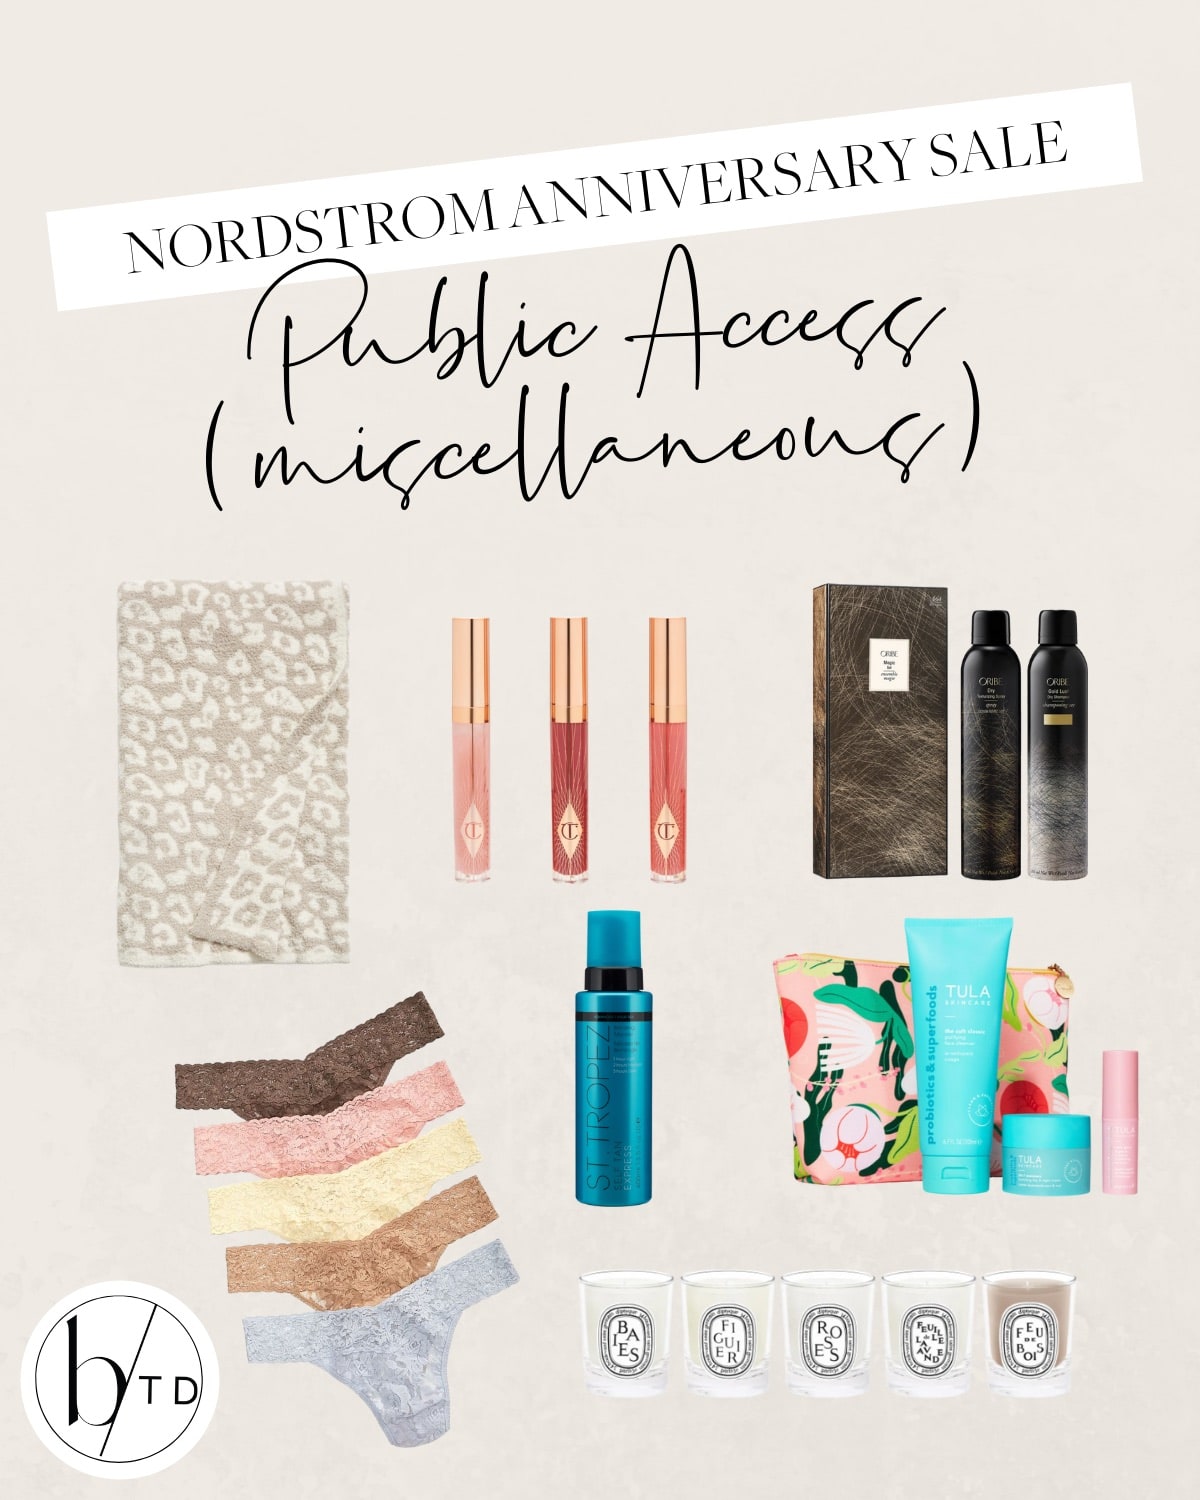 Nordstrom Anniversary Sale Miscellaneous items